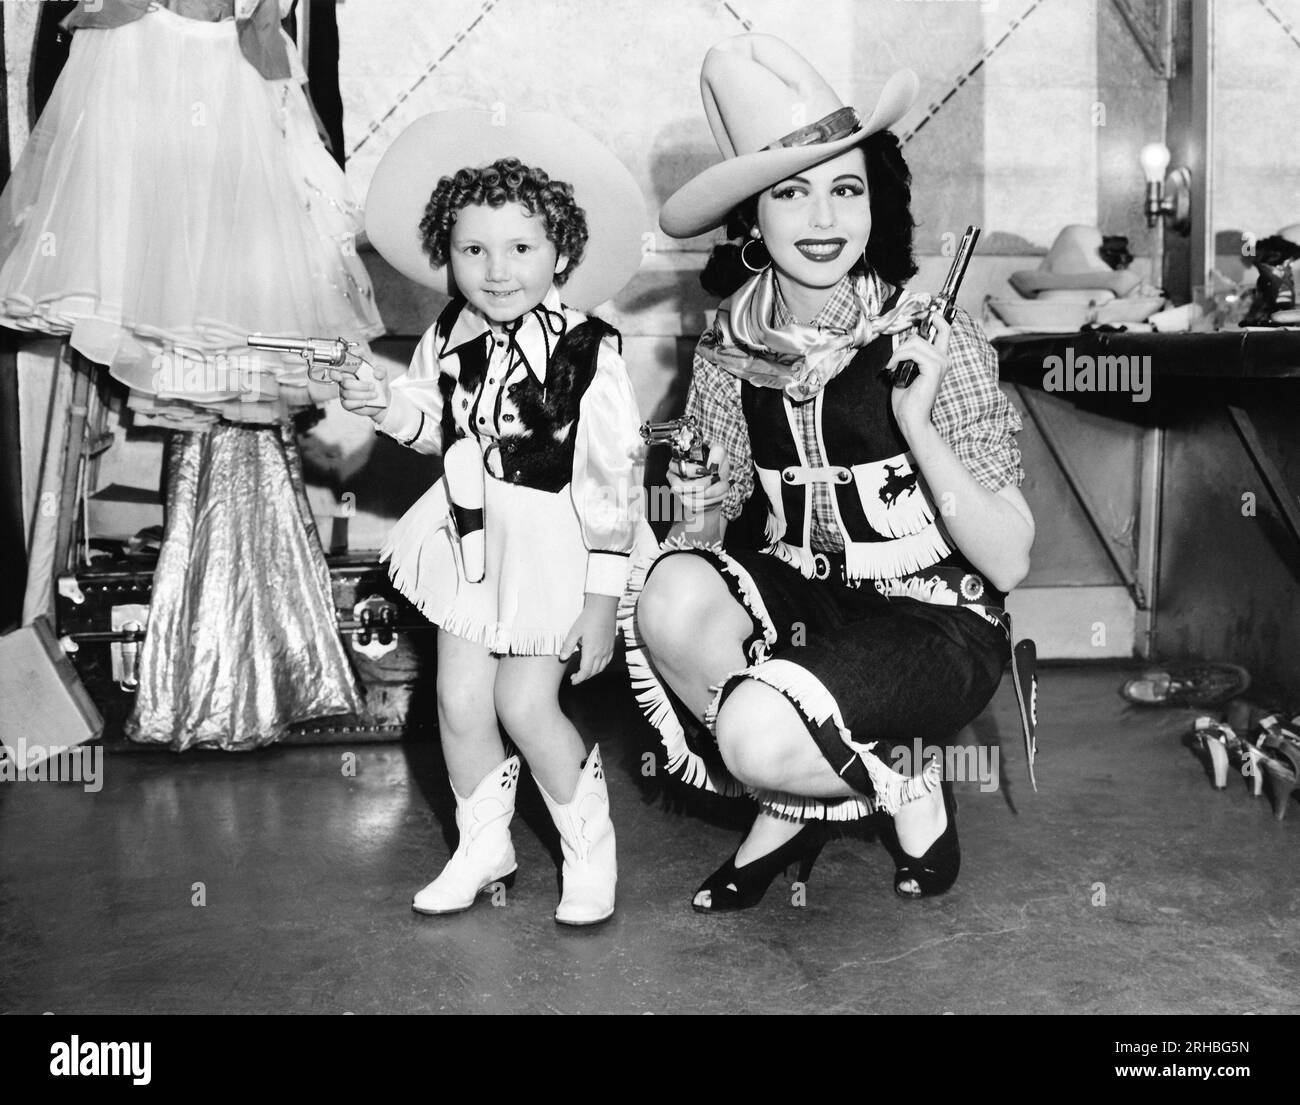 Oakland, California:   May 9, 1940 Four year old 'Baby Streamline' of the 1940 Golden Gate International Exposition and Ann Miller, dancing star of  George White's Scandals, team up for Oakland's Golden Forties Fiesta preceding the opening of the Exposition on Treasure Island. Stock Photo